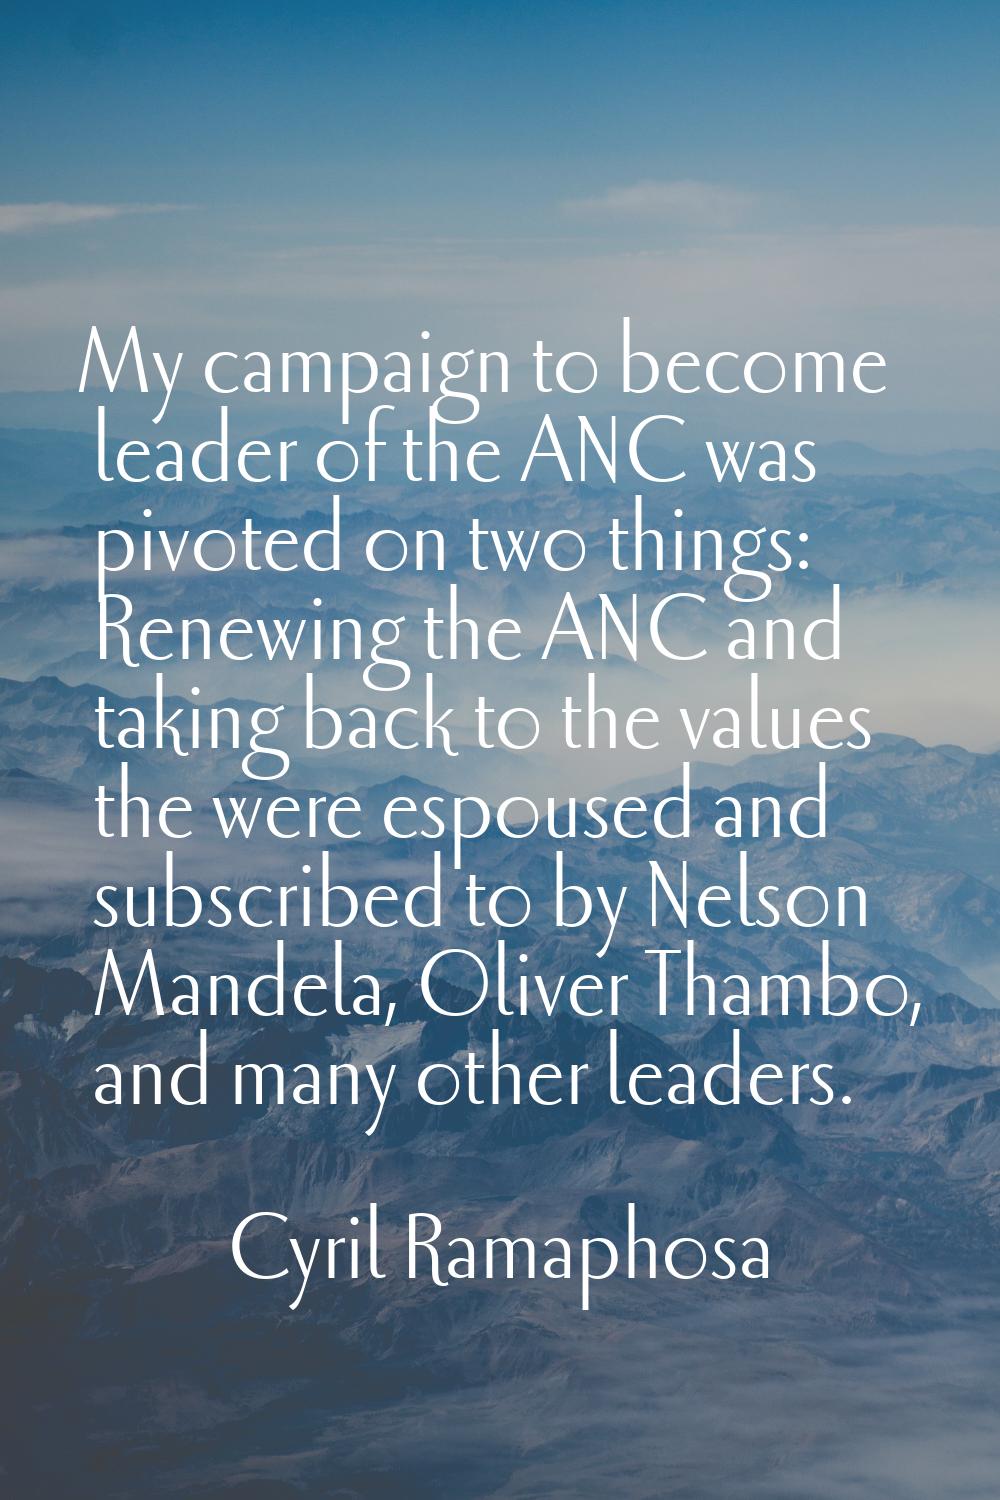 My campaign to become leader of the ANC was pivoted on two things: Renewing the ANC and taking back